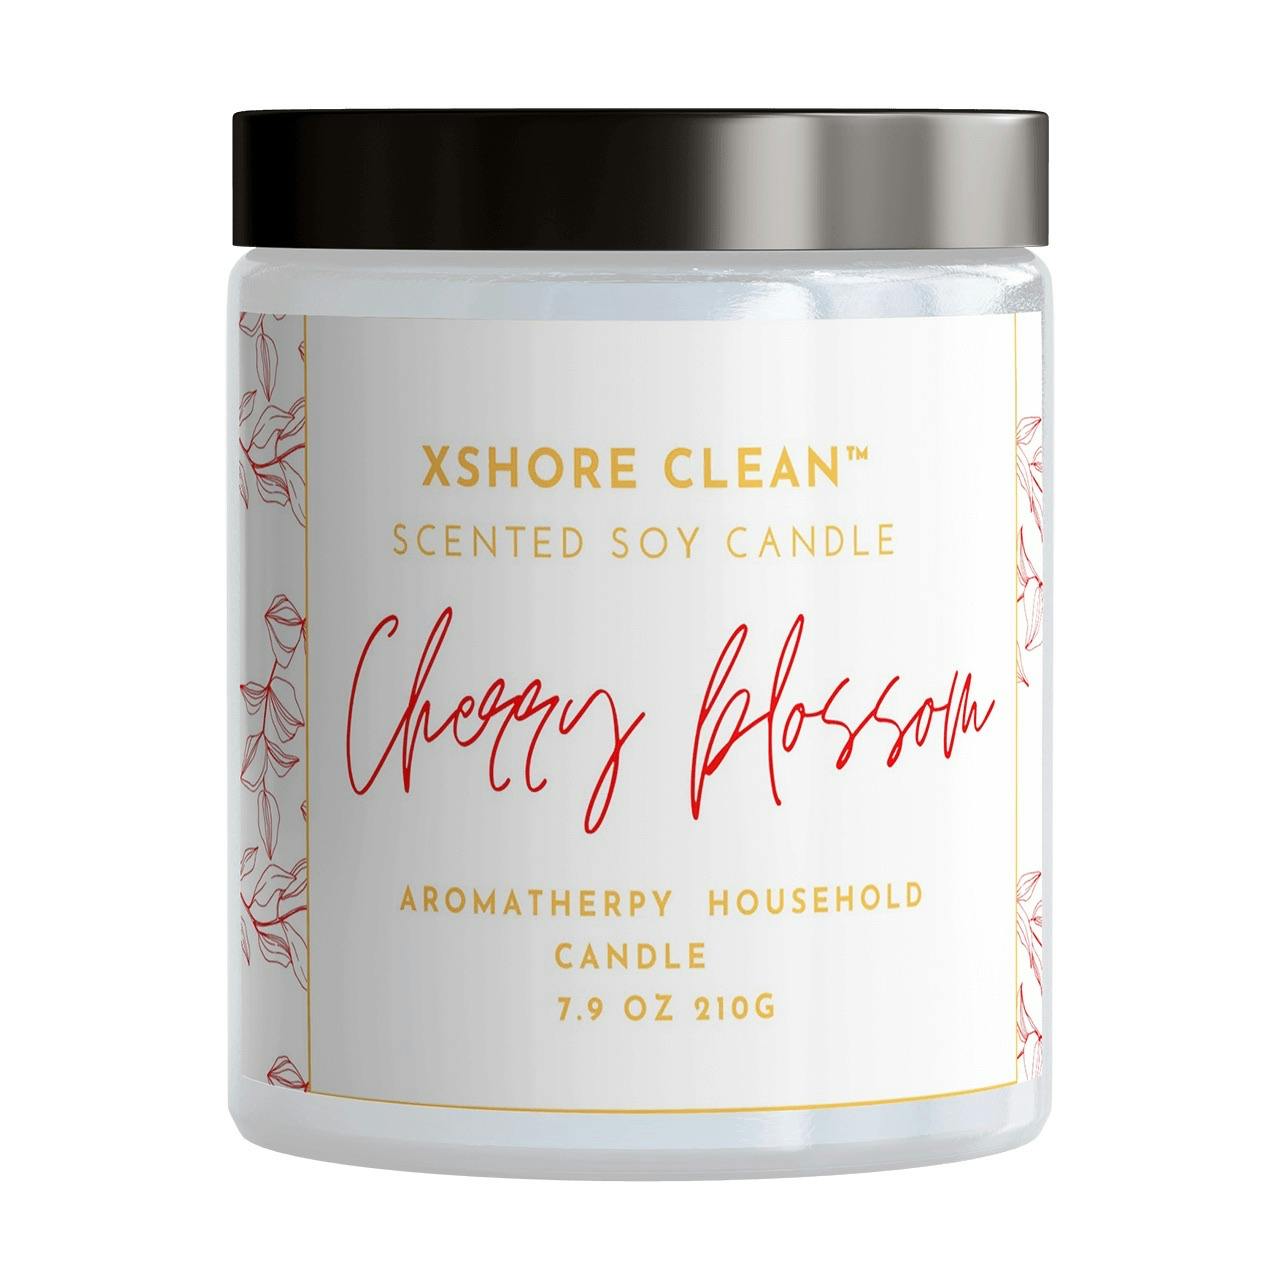 Xshore Clean Cherry Blossom Candle